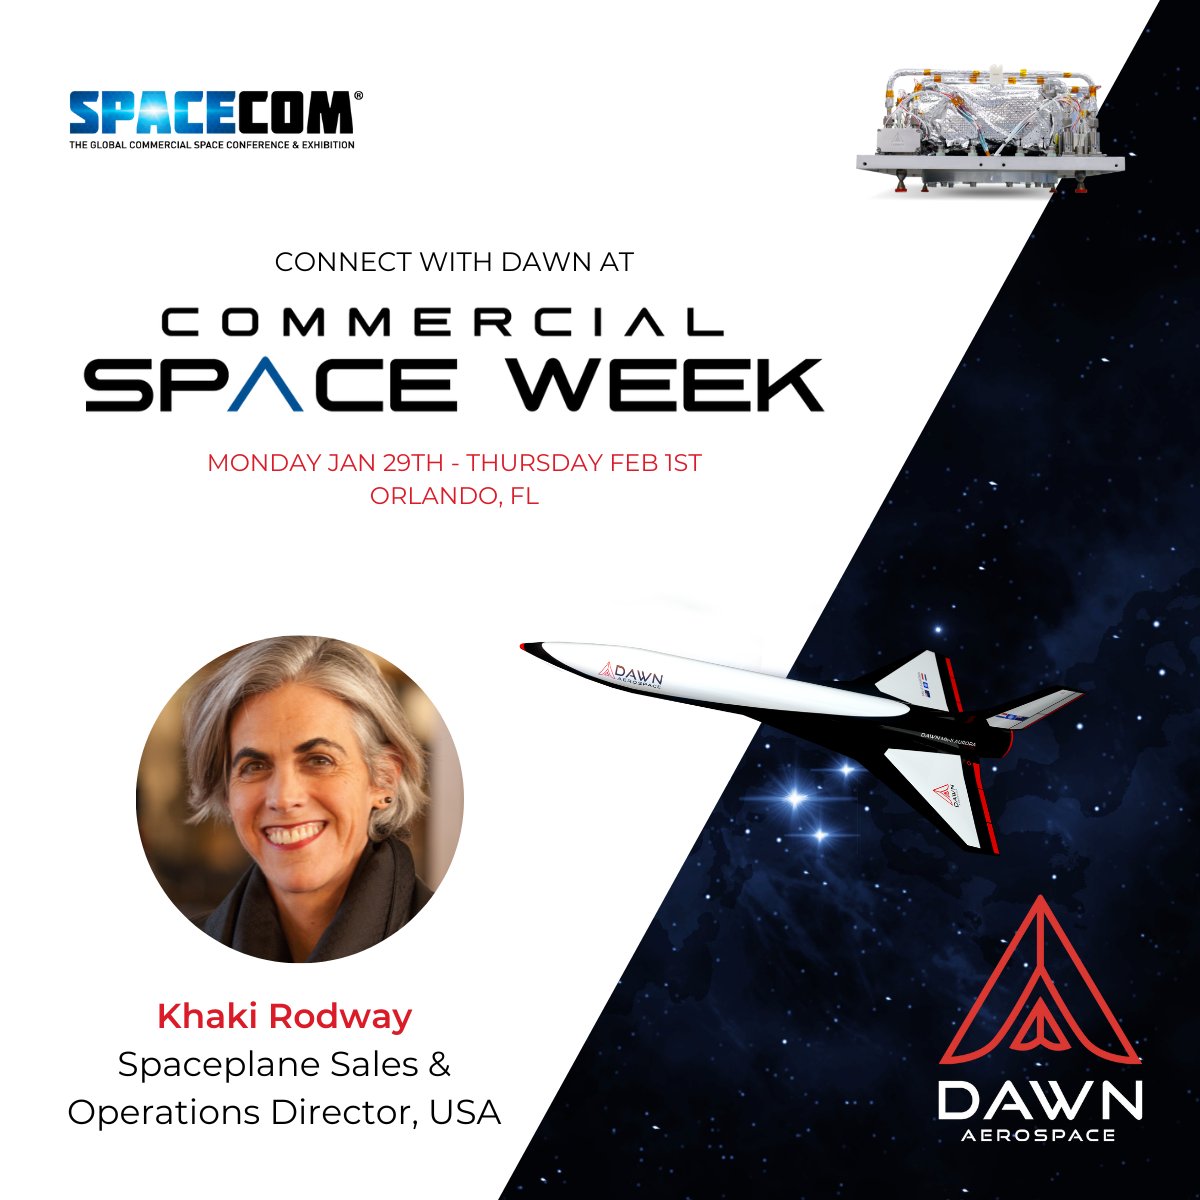 Dawn is attending @SpaceComExpo's Commercial Space Week in Orlando this week. Reach out to @khakirodway if you want to chat high-performance rocket-powered aircraft 🚀 or high-performance green propulsion 🛰🌱